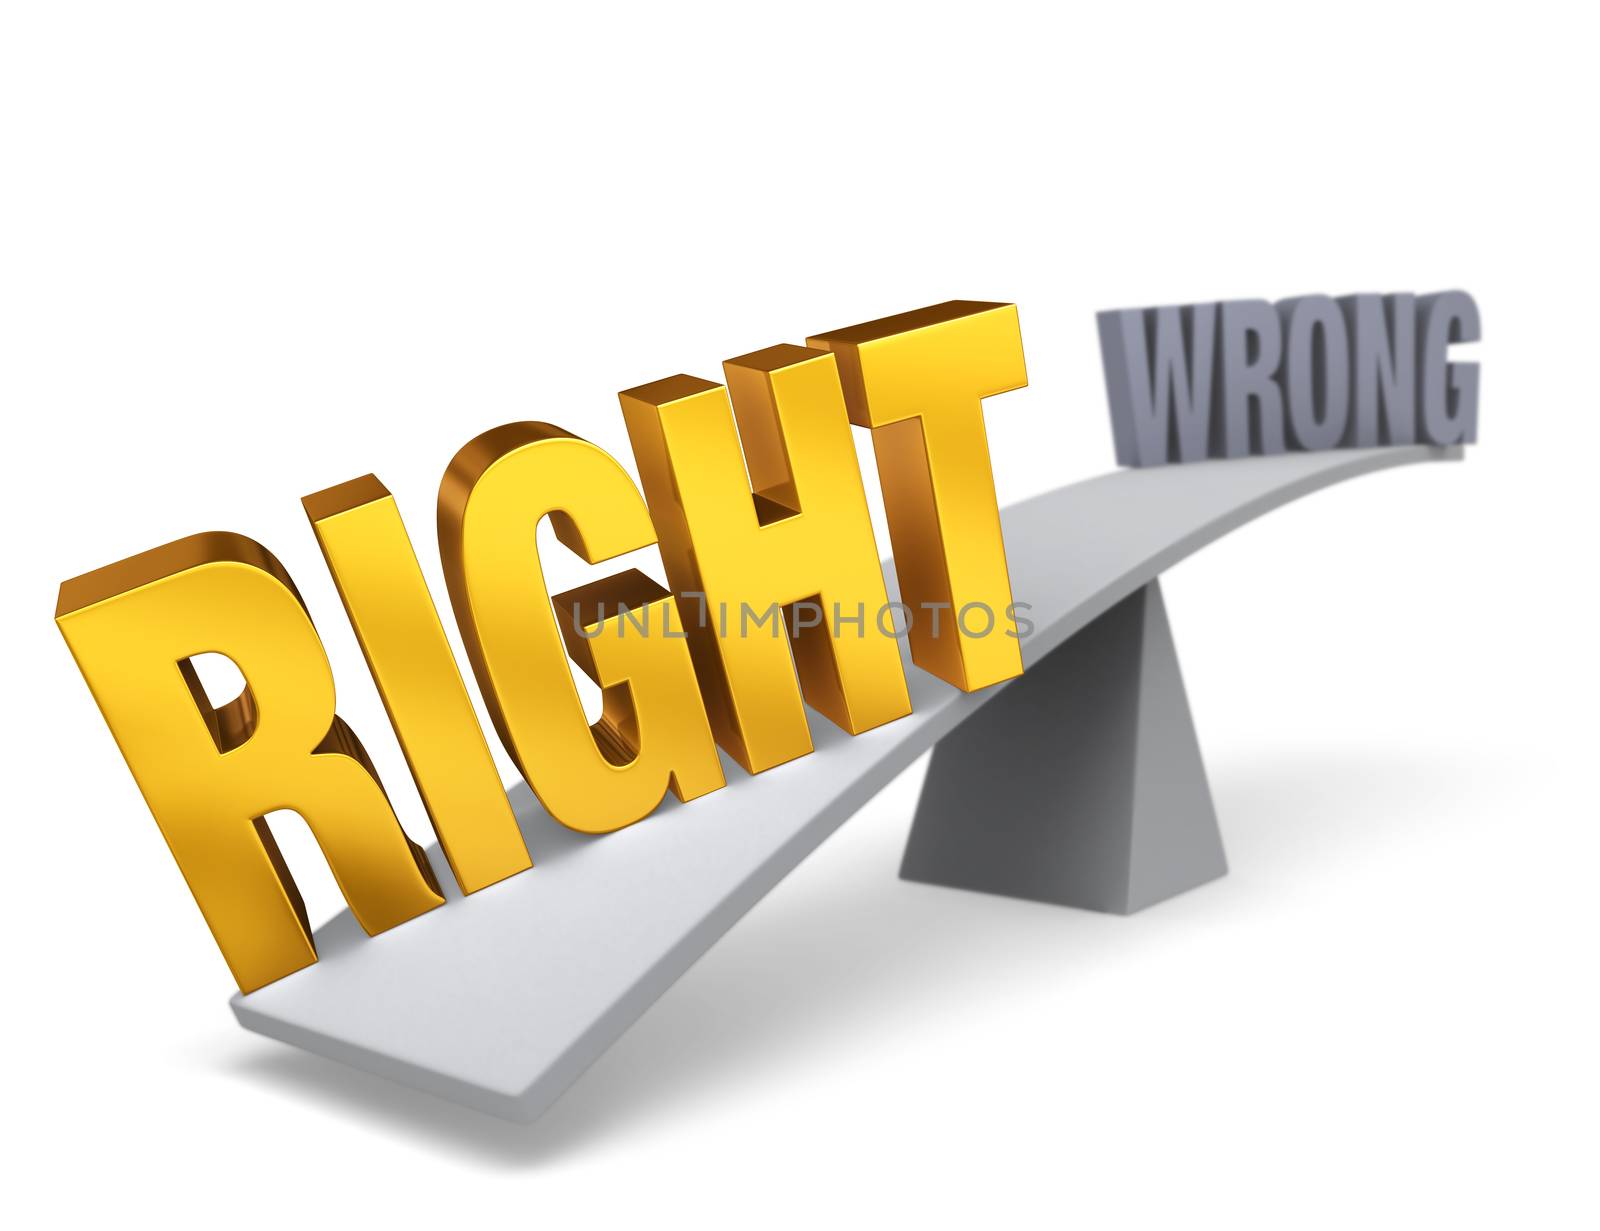 Right Weighs In Against Wrong by Em3